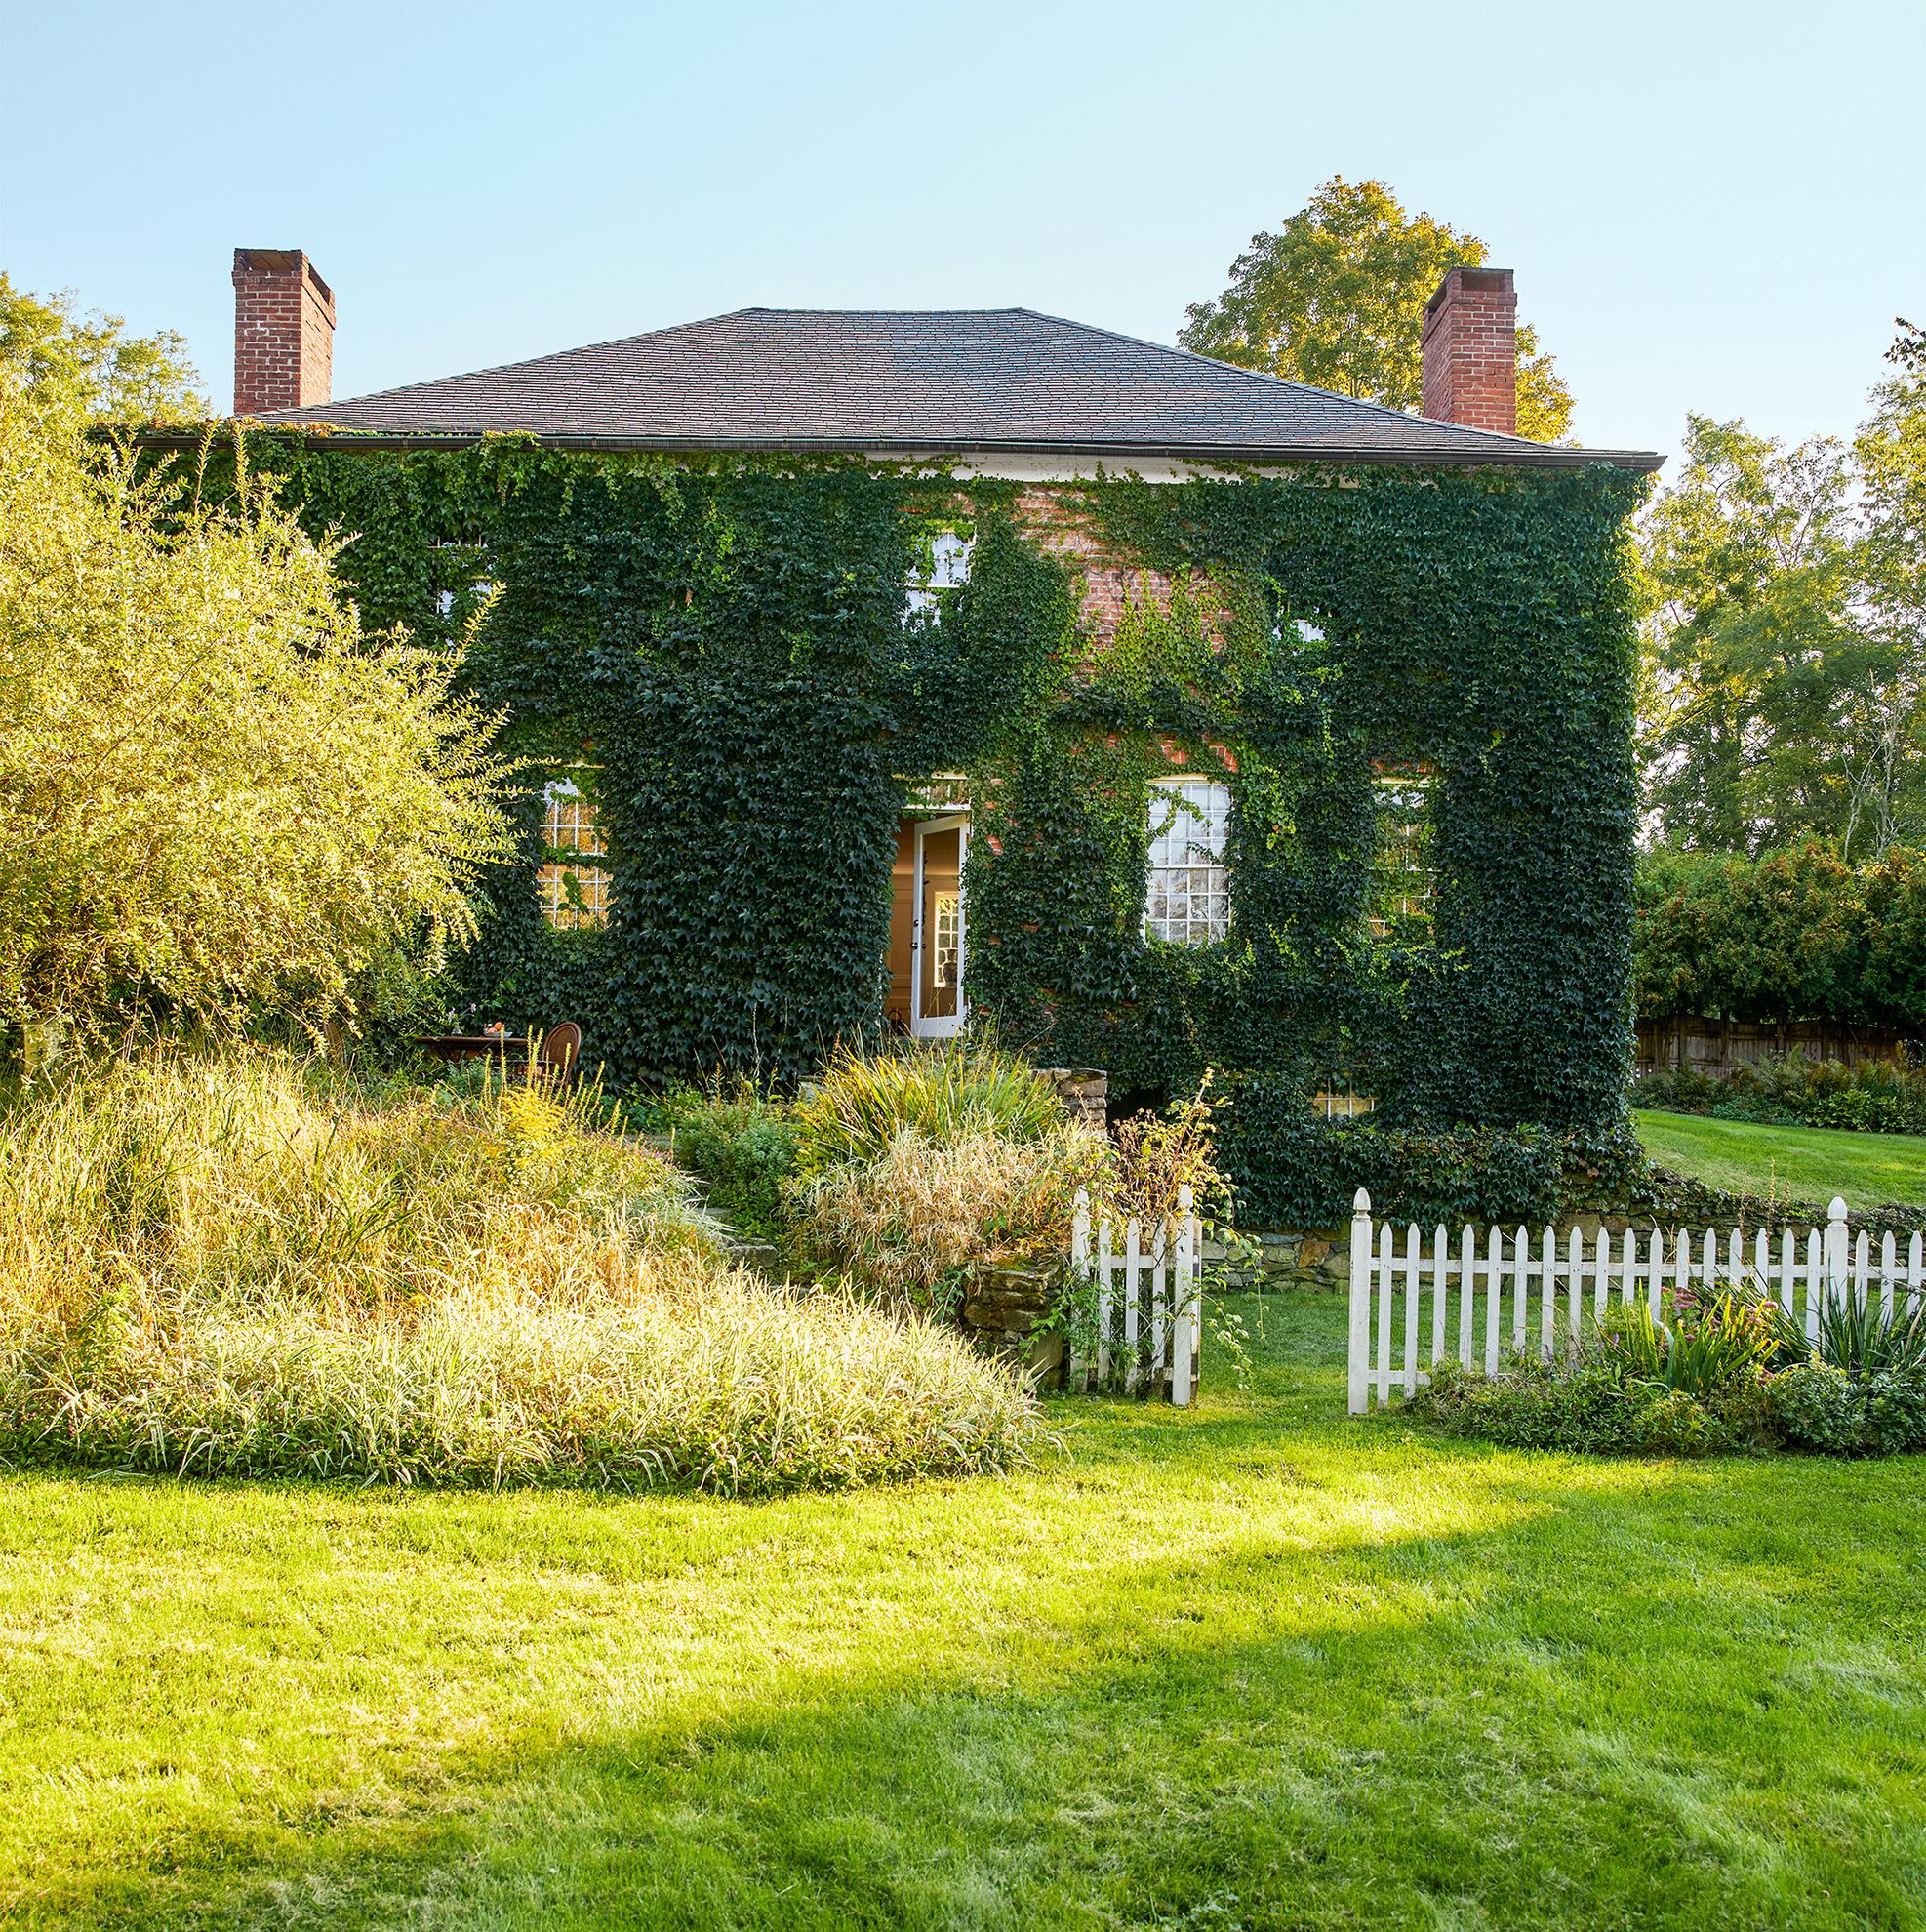 This Stately Georgian House in Upstate New York Gave One Homeowner a New Sense of Community